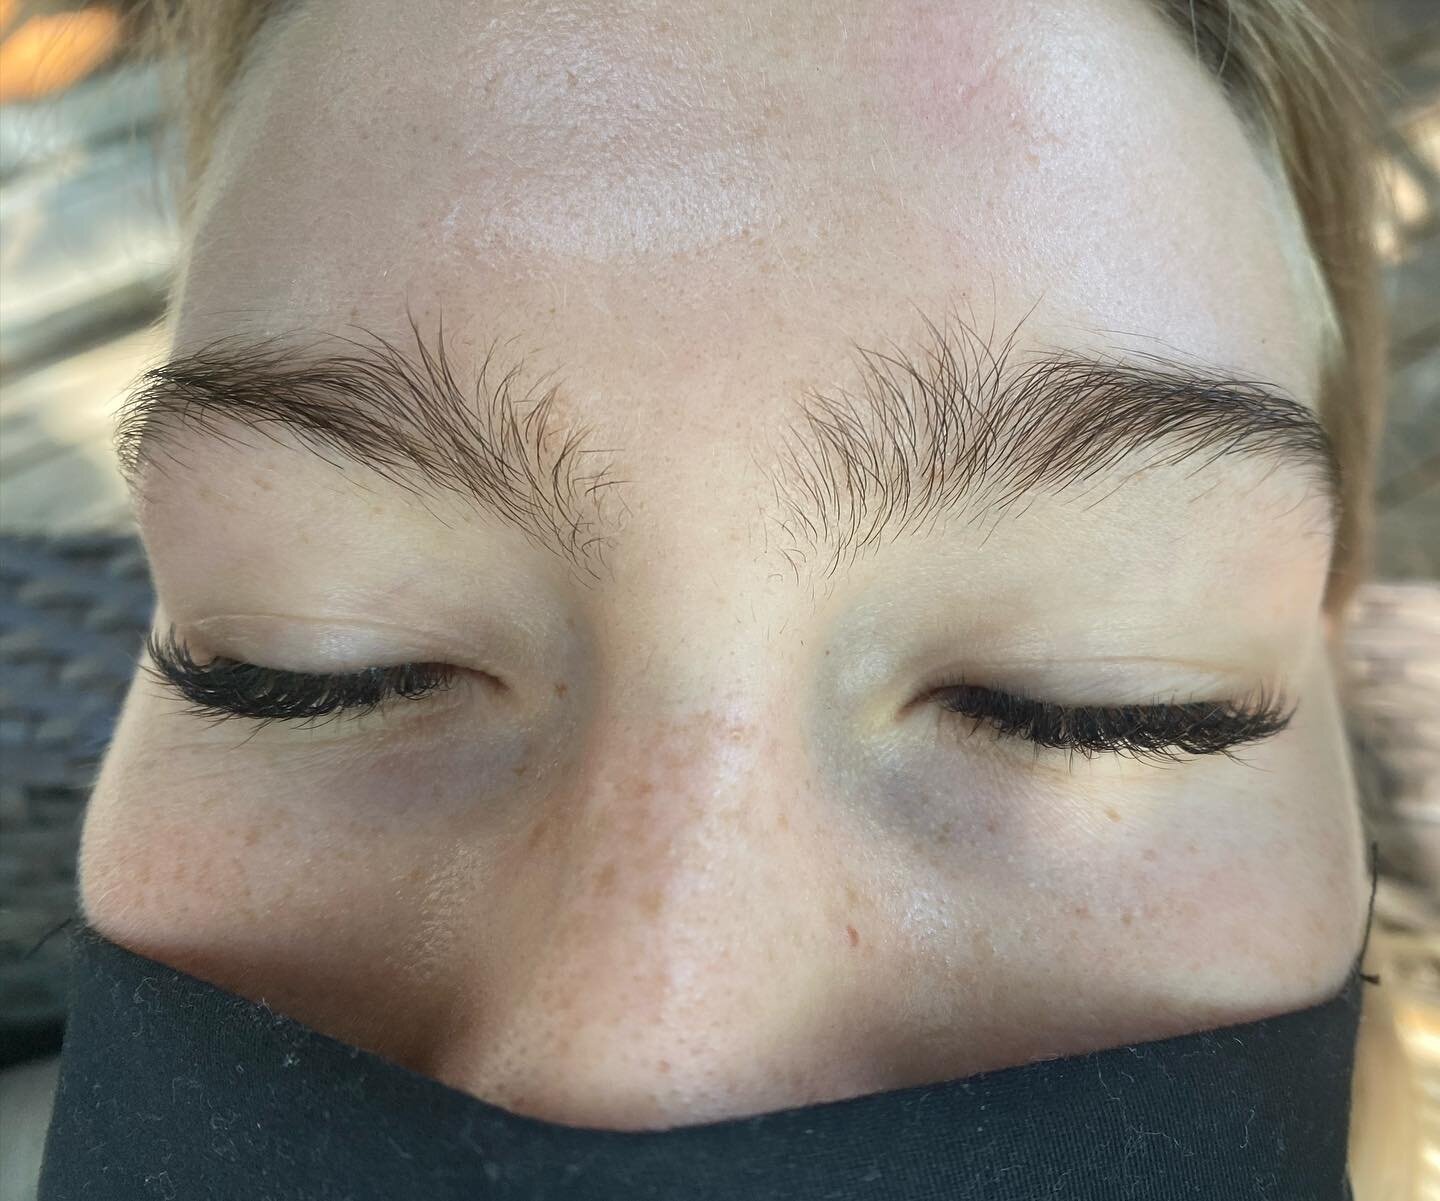 The &ldquo;before&rdquo; definitely puts the &ldquo;after&rdquo; into perspective. As always, we kept bushiness + balance in mind, keeping some small new hairs to complete the brow. But I don&rsquo;t think anyone&rsquo;s mad about this natural brow ?